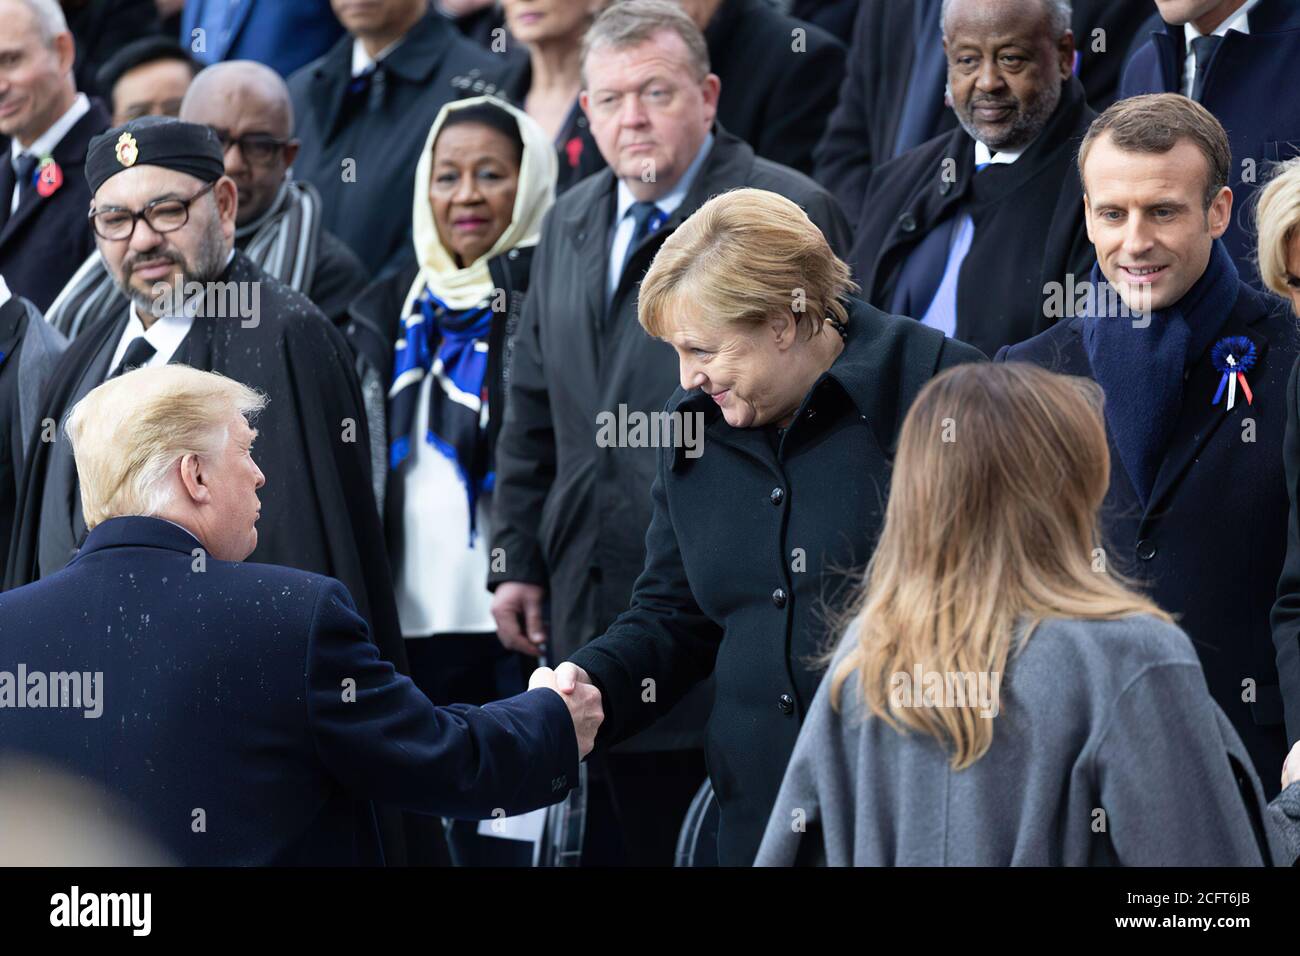 The Centennial of the 1918 Armistice Day Ceremony - Trump and Angela Merkel of Germany. President Donald J. Trump and First Lady Melania Trump attend the Centennial of the 1918 Armistice Day ceremony Sunday, Nov. 11, 2018, at the Arc de Triomphe in Paris. Stock Photo